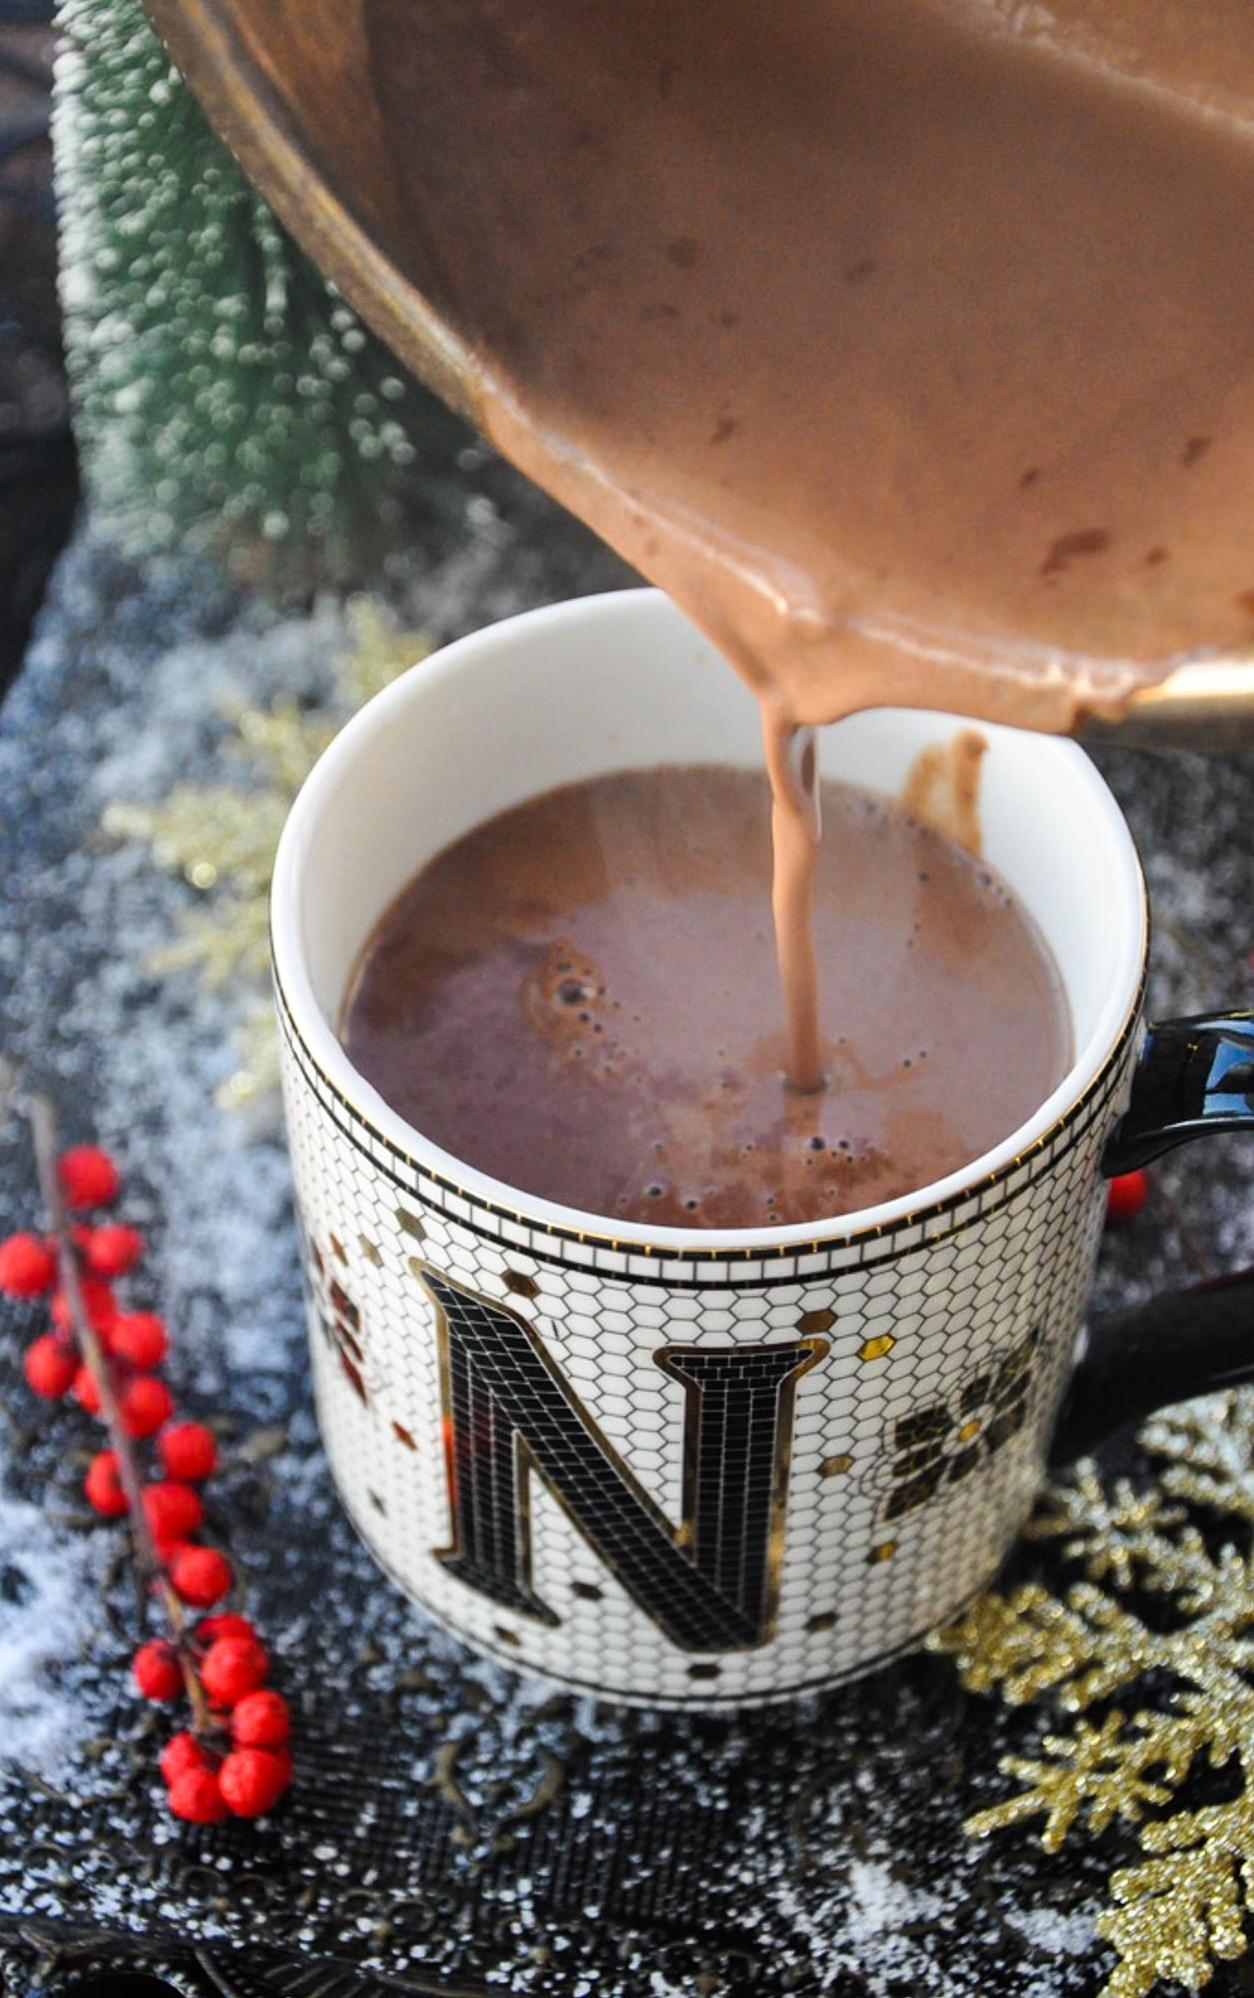 Delicious Mocha-Soy Hot Chocolate Recipe for Chilly Nights